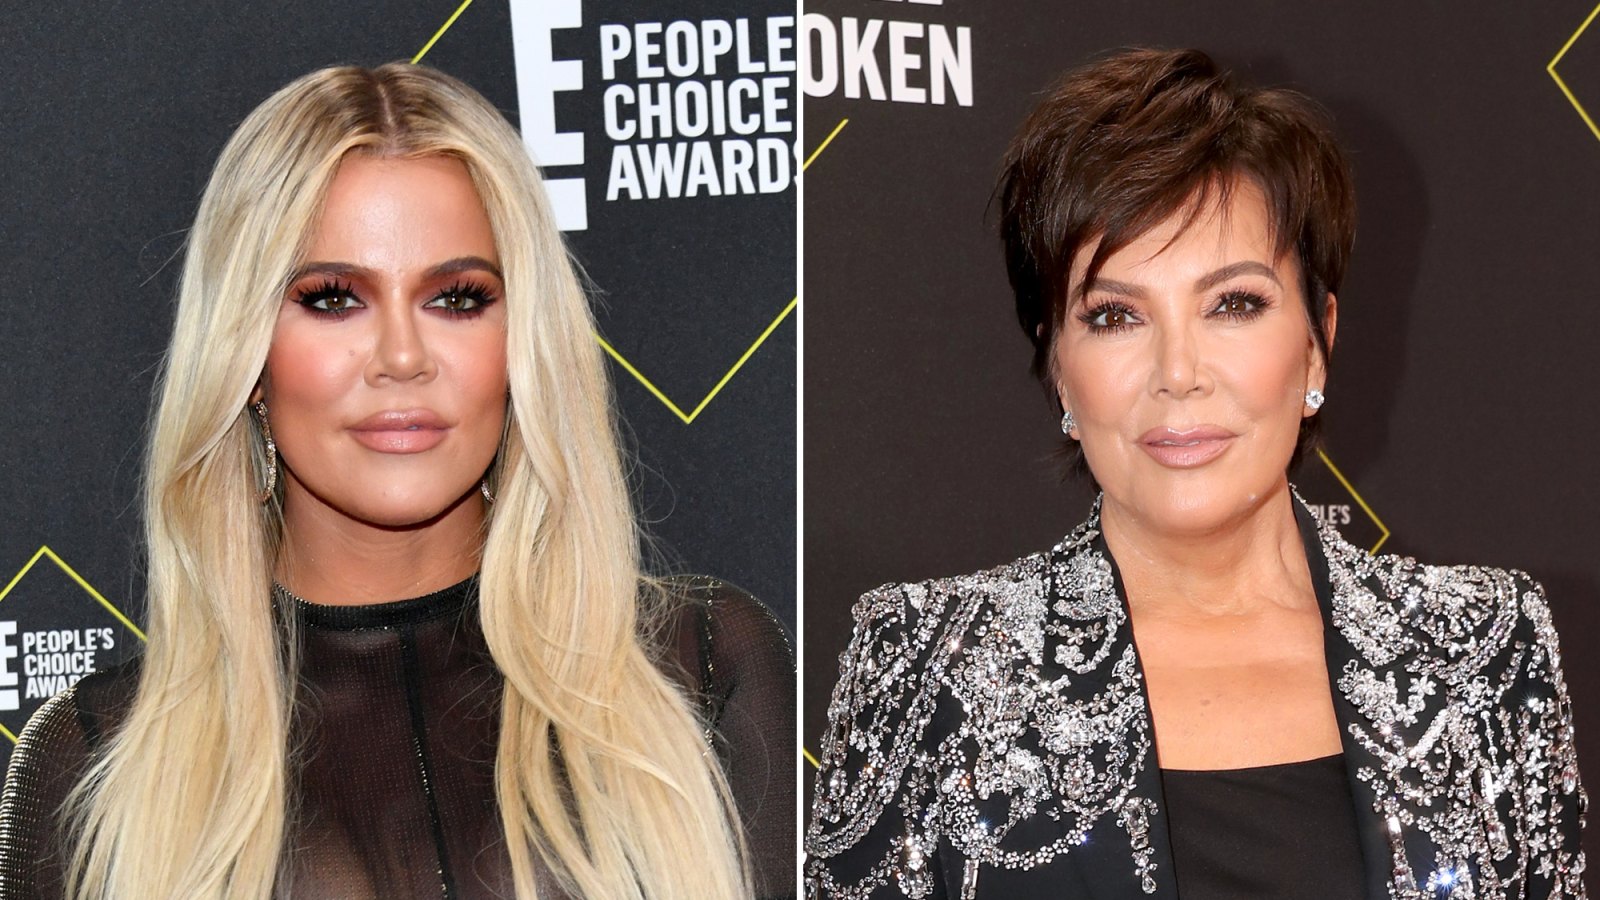 Khloe Kardashian Begs Kris to Stop Talking About Her Sex Life: 'Couldn't Be More Opposite'